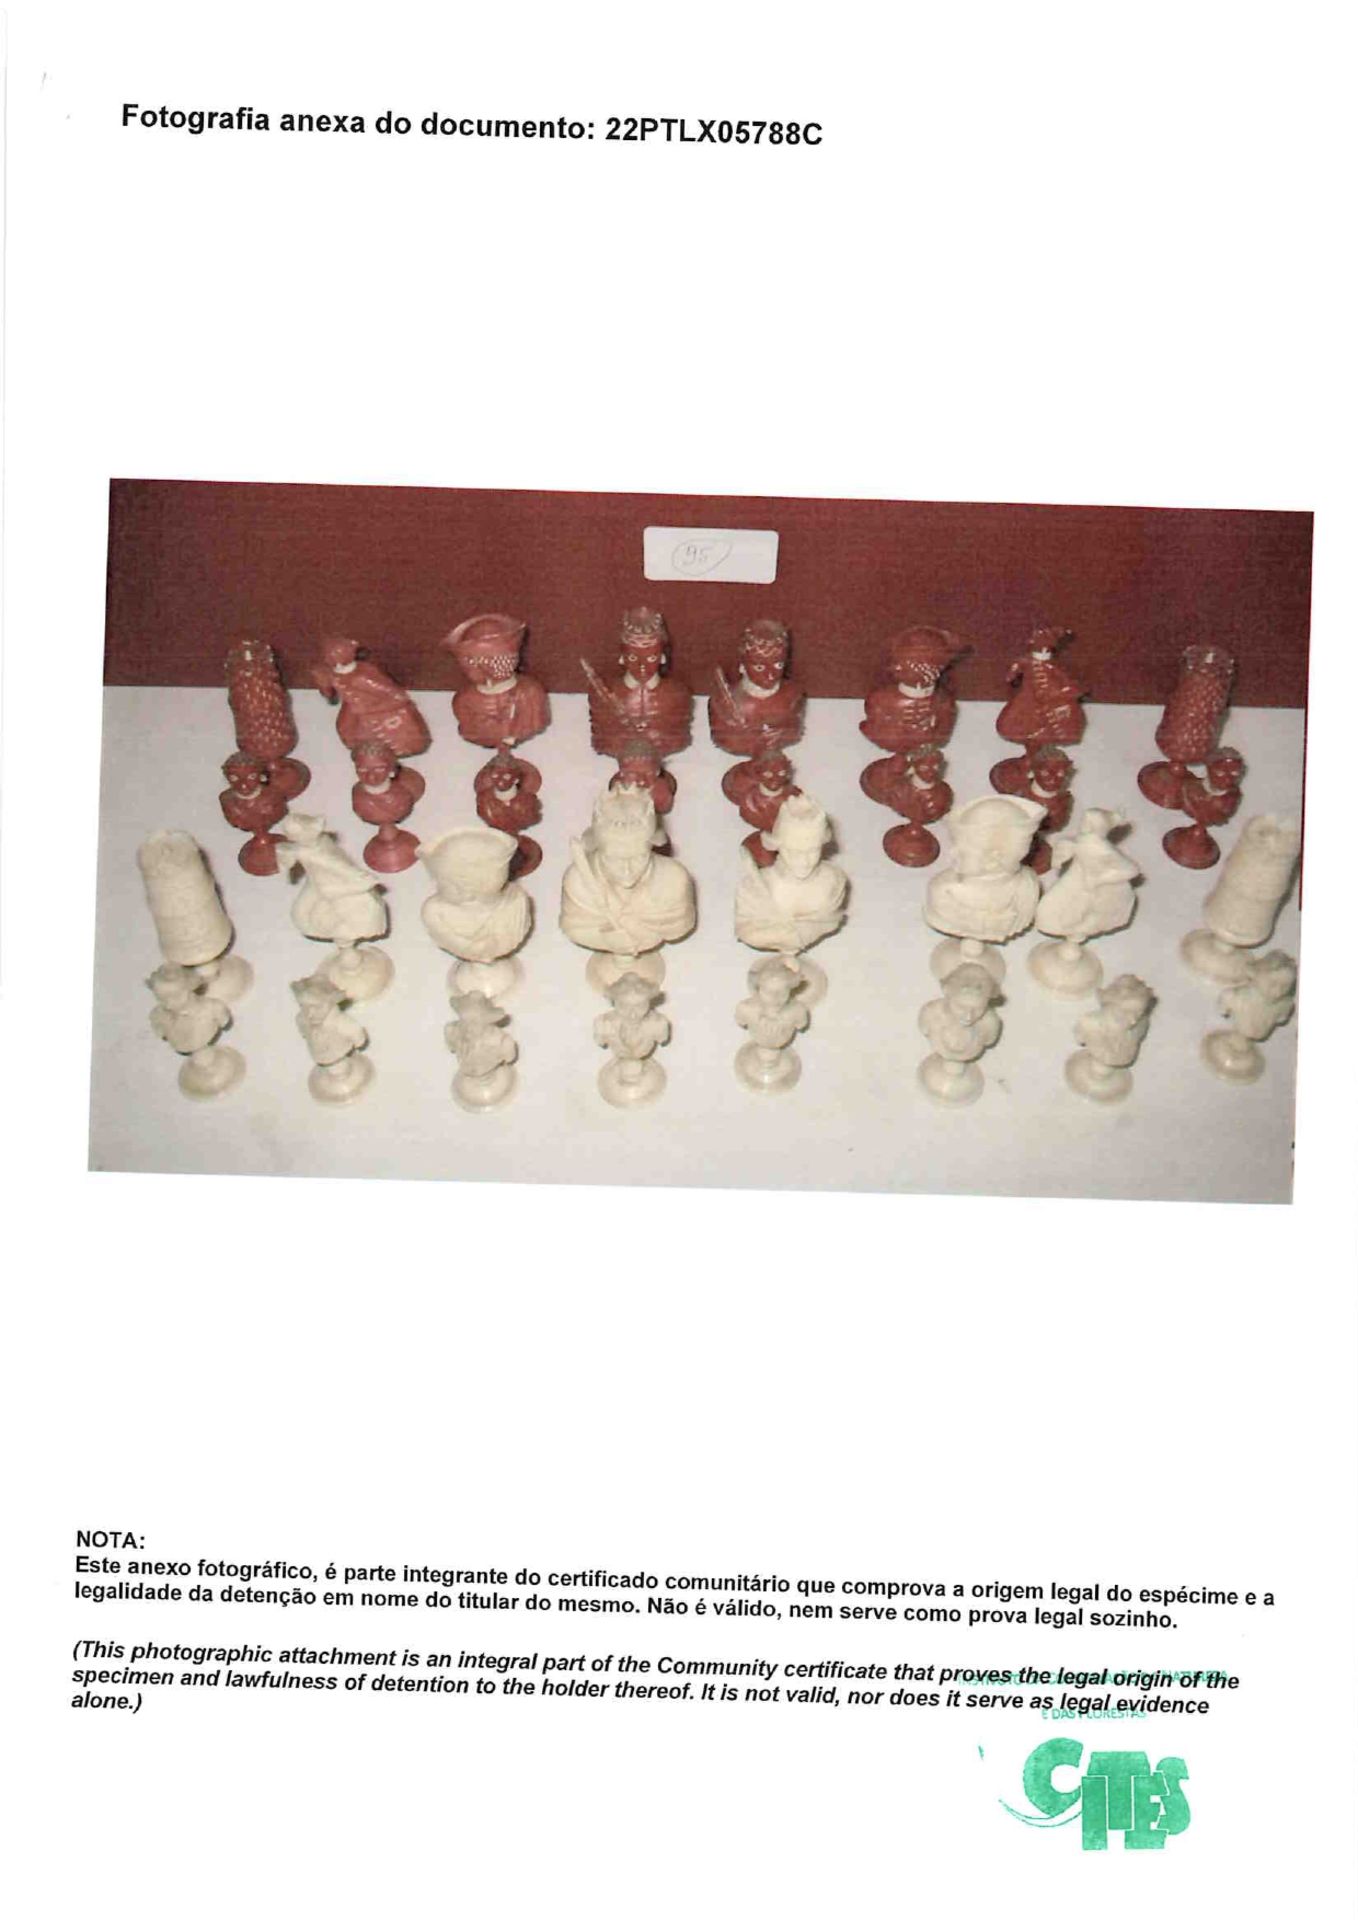 Chess pieces - Image 9 of 9